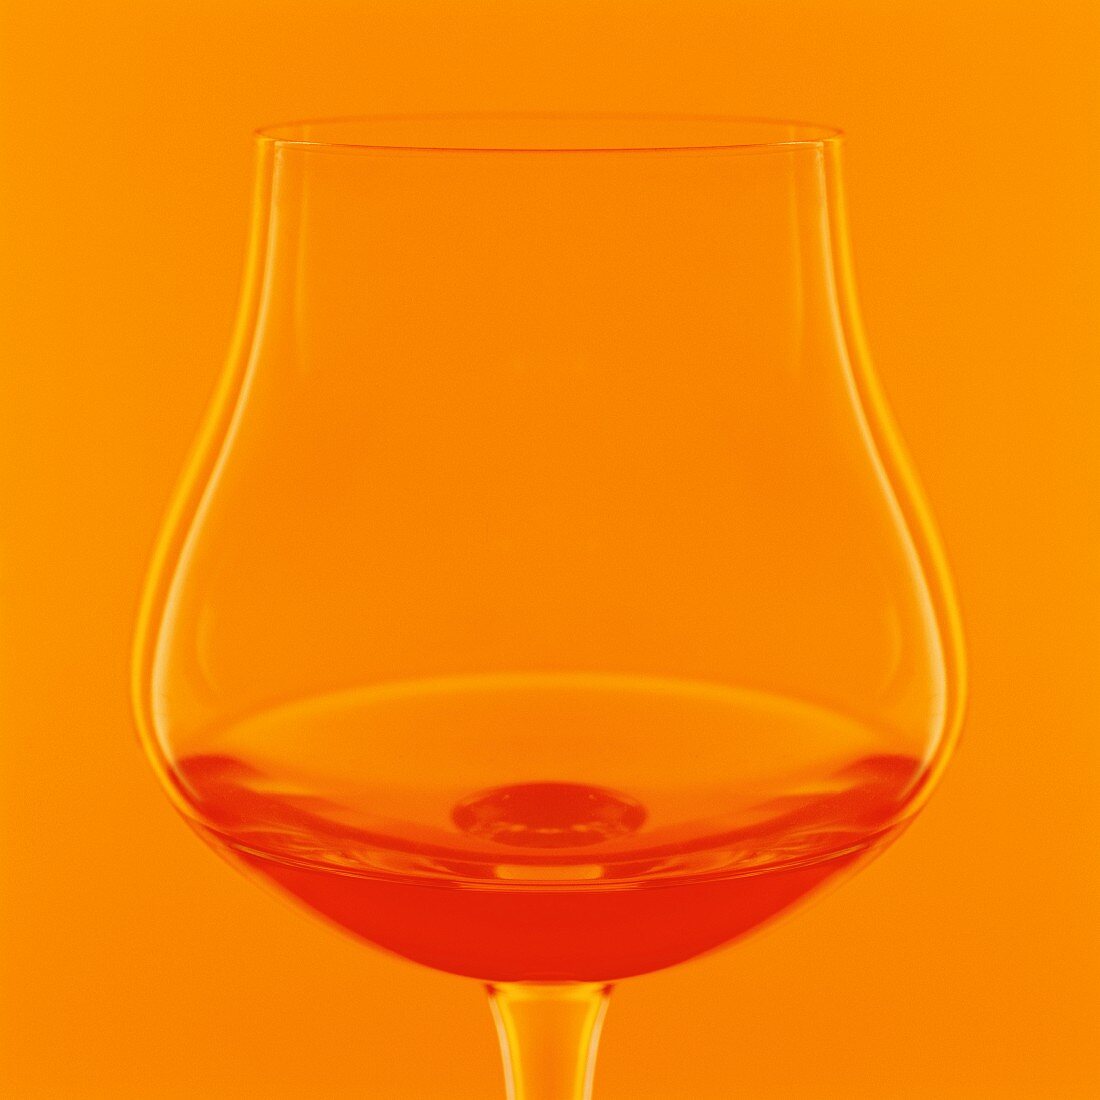 A glass of cognac in from of an orange background